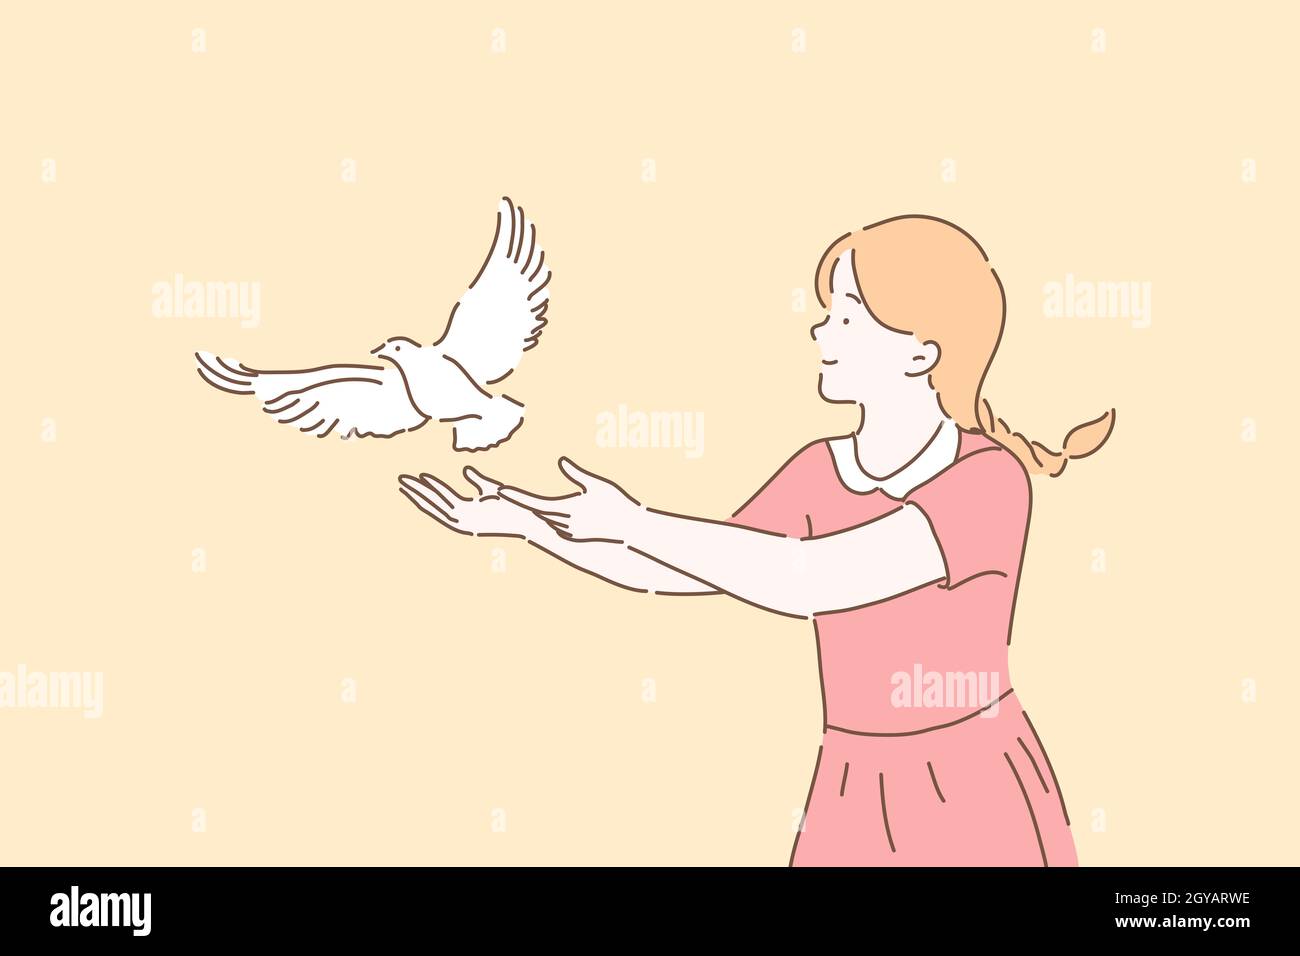 Peace symbol, freedom metaphor concept. Girl letting go white dove, cute kid setting free pigeon with open arms gesture, female volunteer taking care Stock Photo